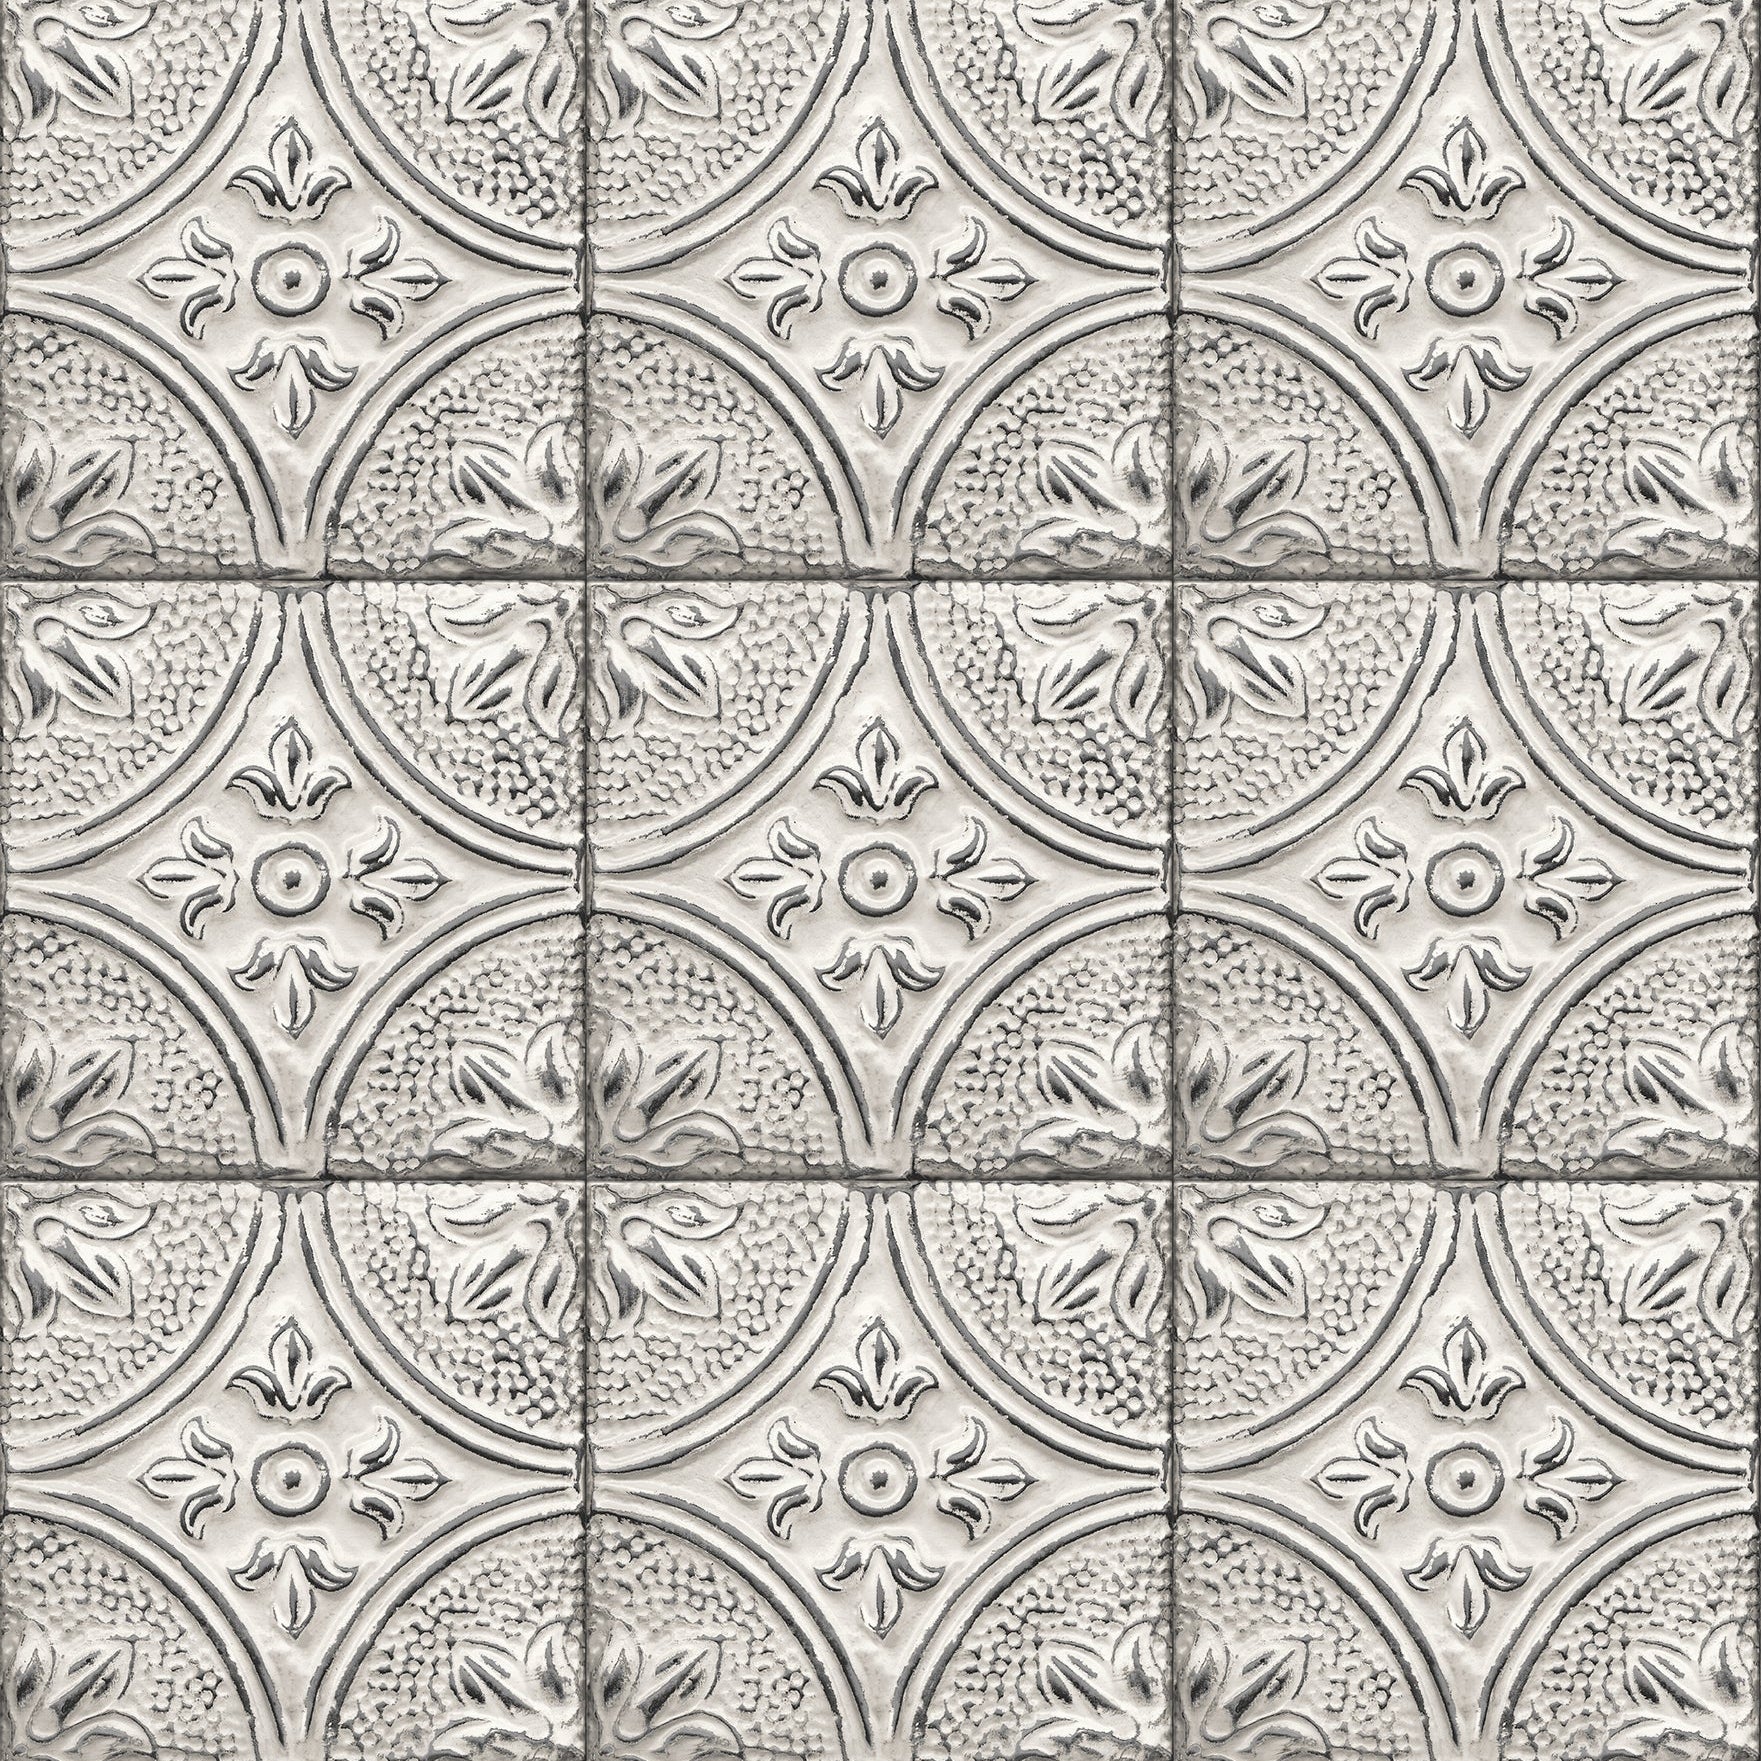 Save 2767-23763 Brasserie Silver Tin Ceiling Tile Techniques & Finishes III Brewster